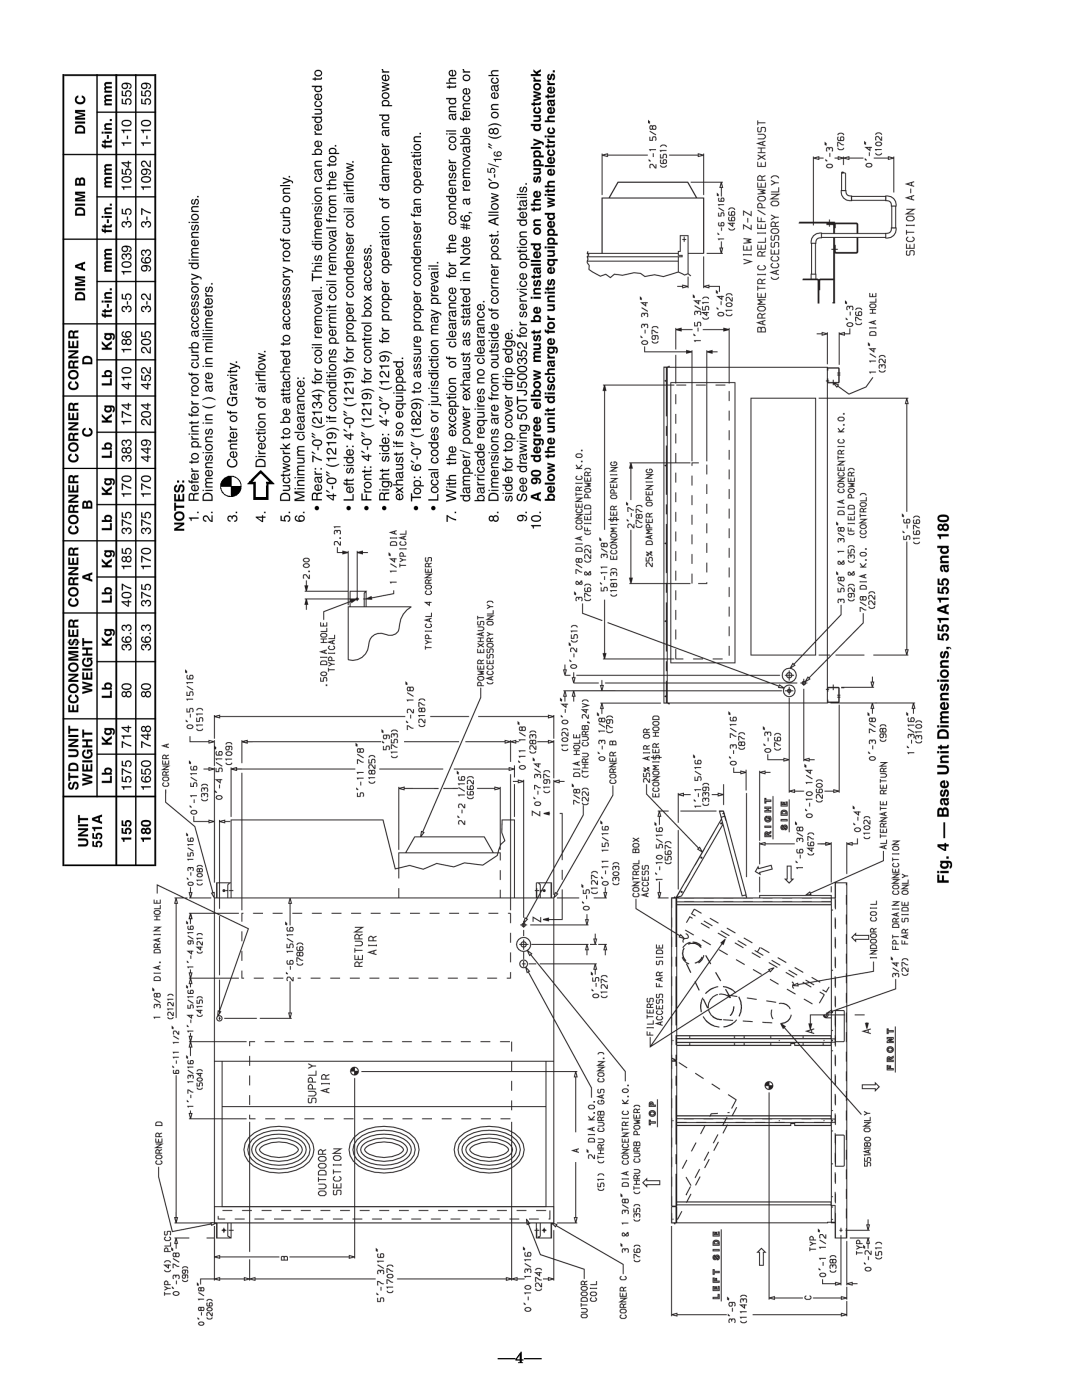 Bryant operation manual Base Unit Dimensions, 551A155 and 